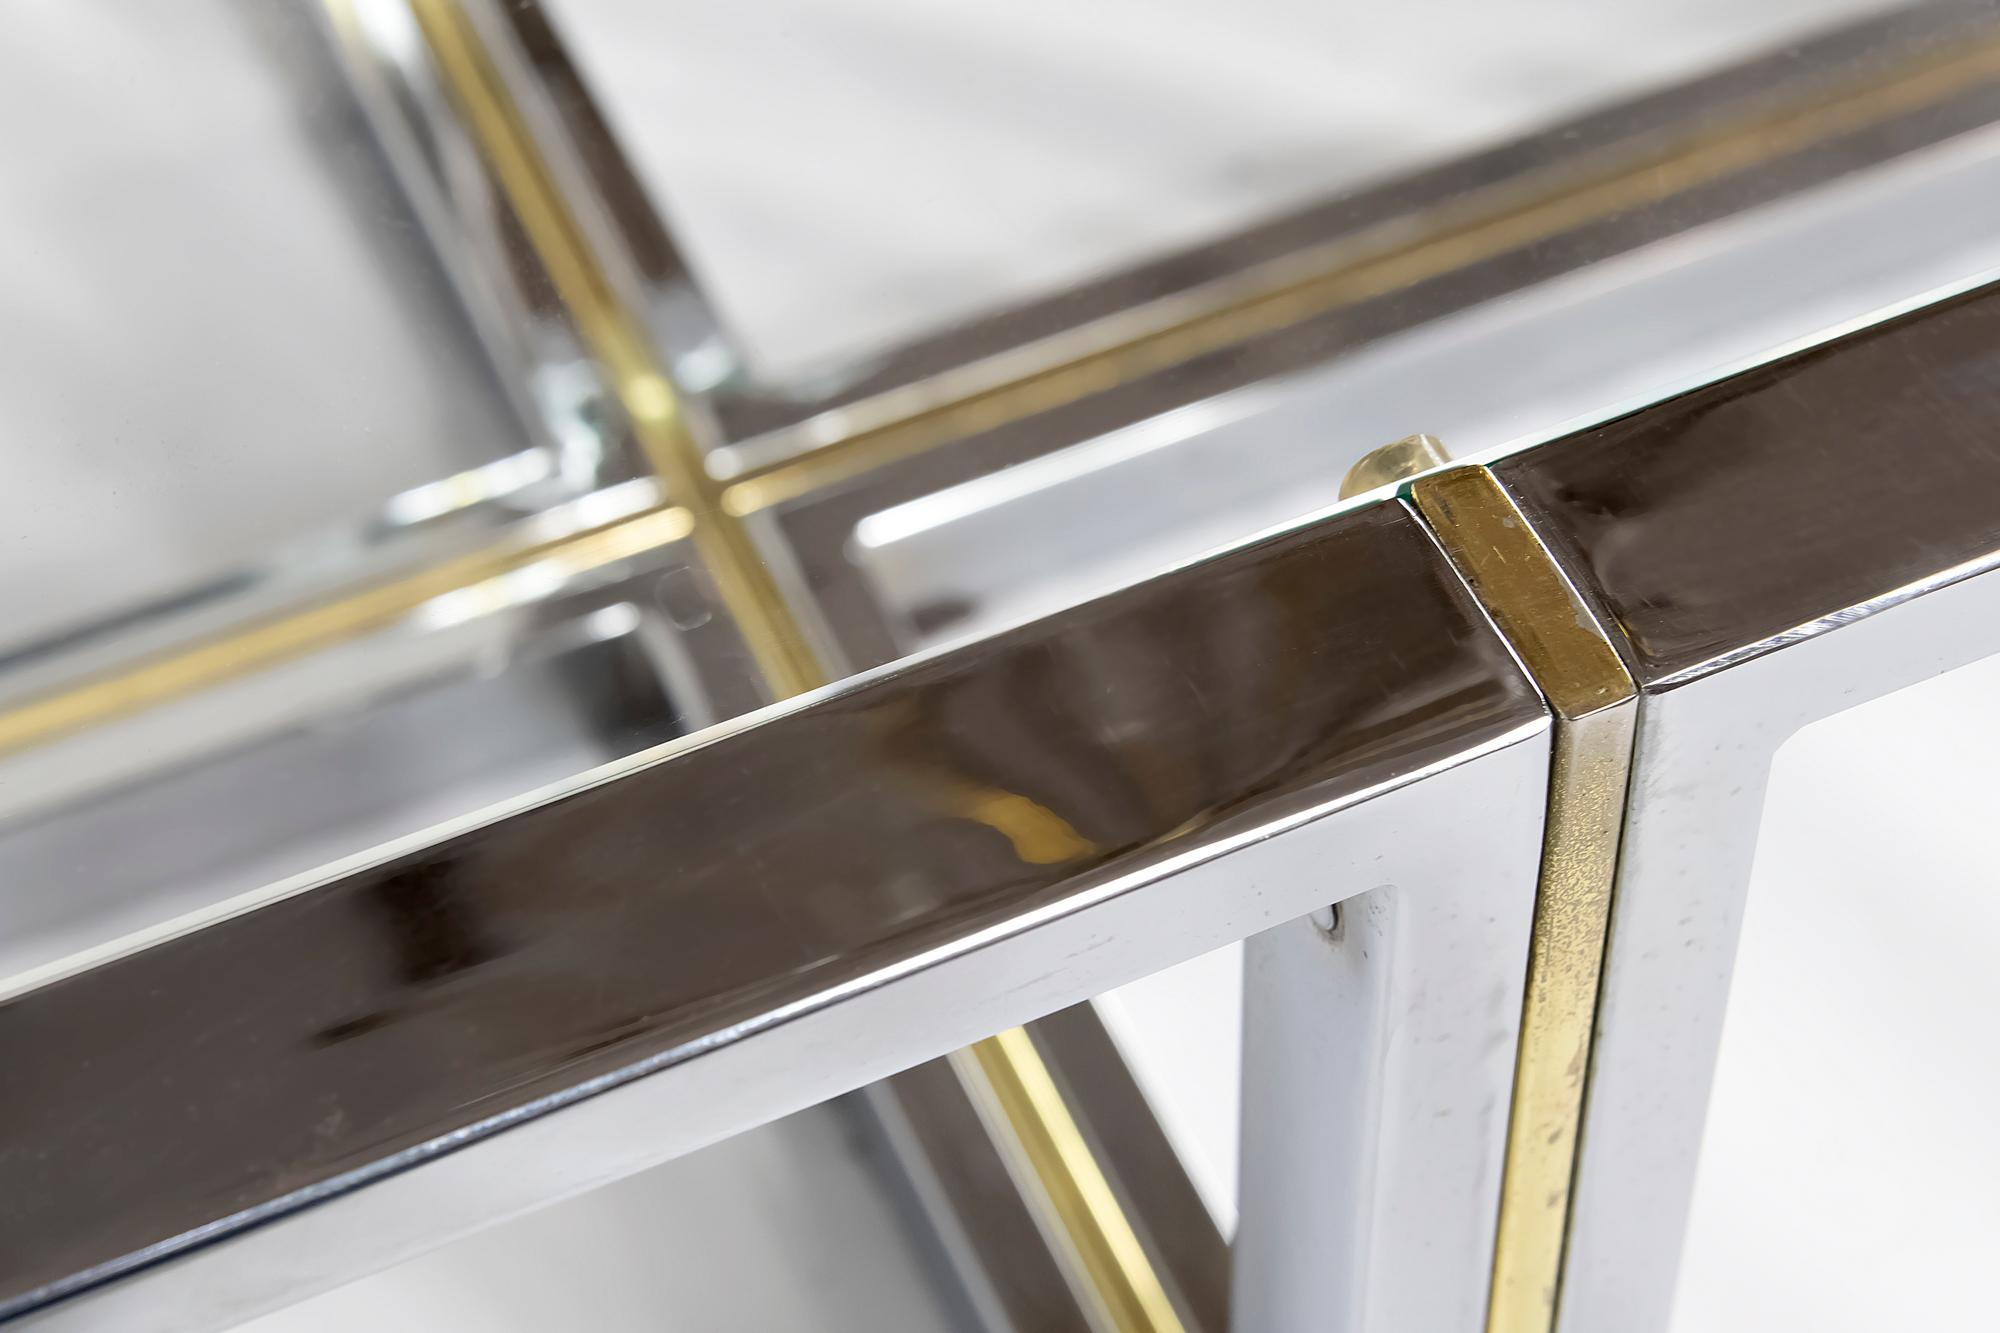 20th Century Italian Midcentury Chrome, Brass and Glass Coffee Table, Willy Rizzo, circa 1970